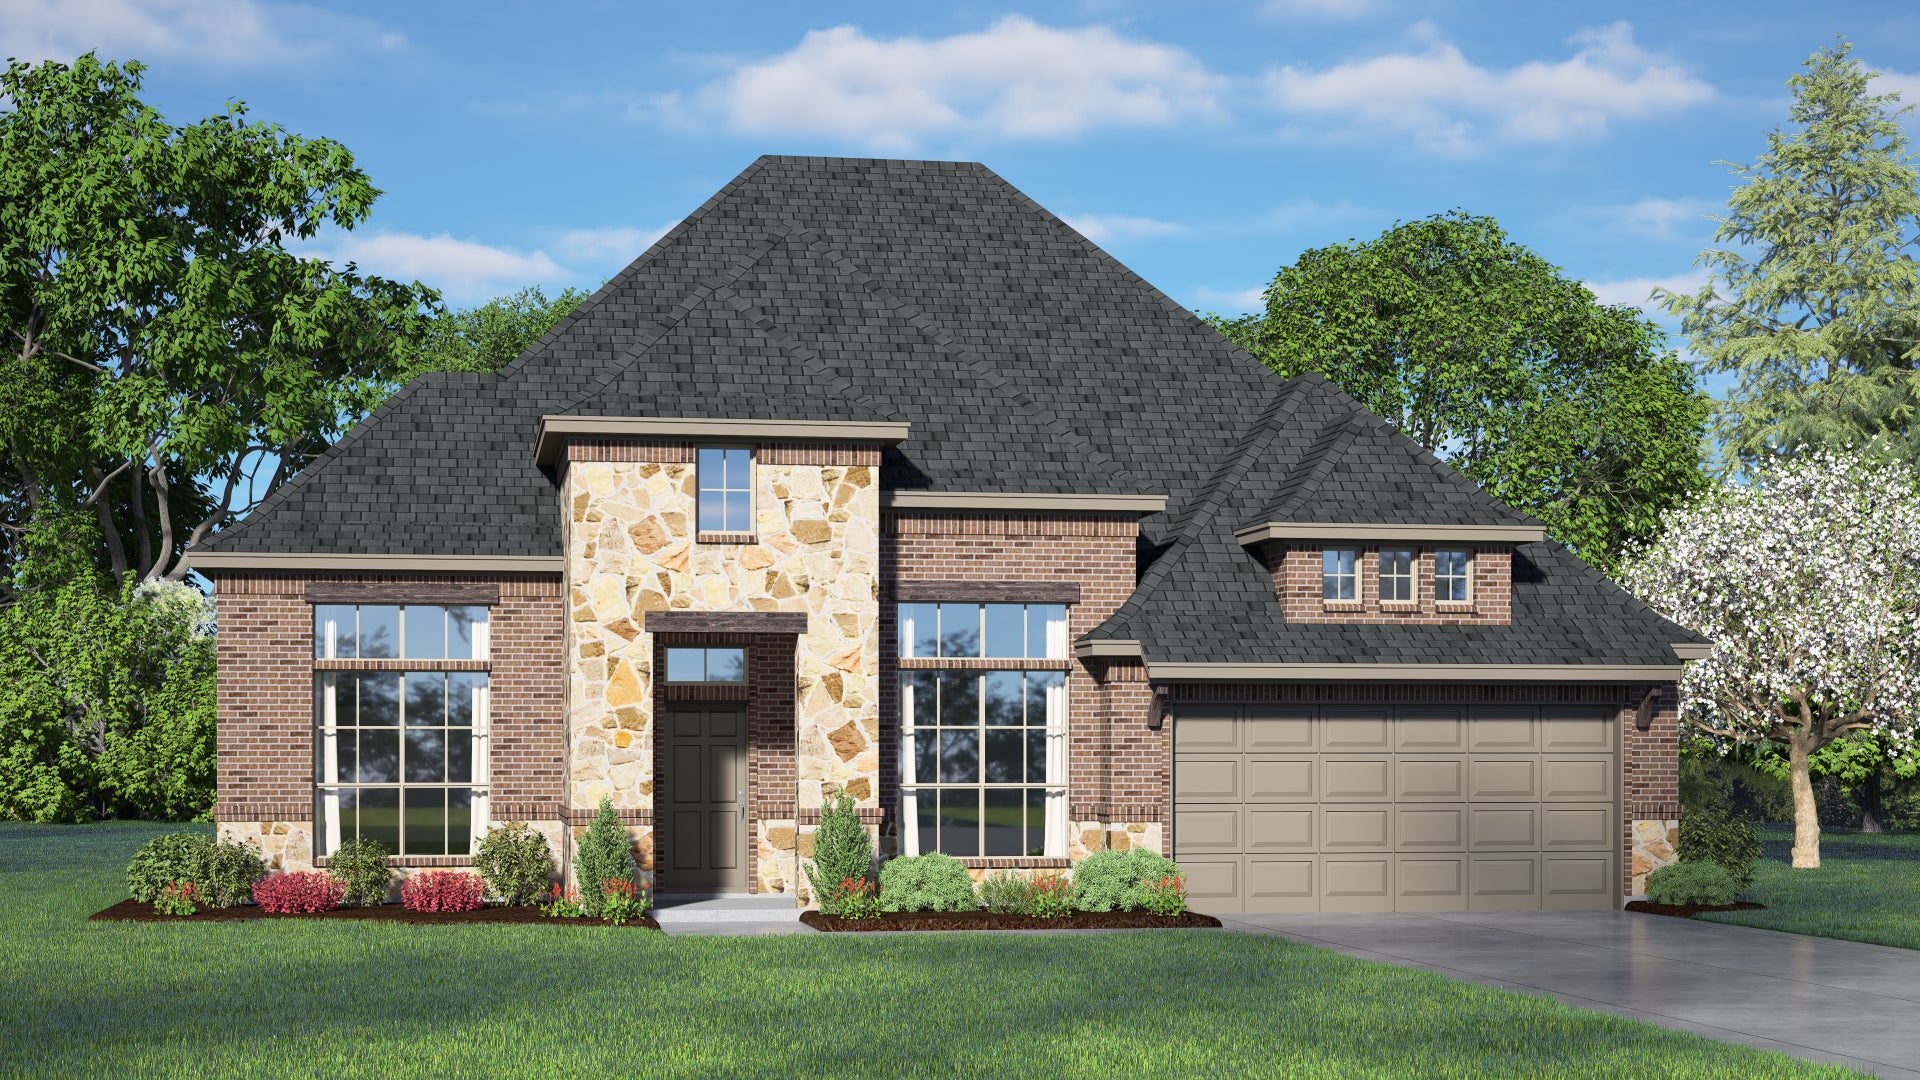 2622 C with Stone. 2,622sf New Home in Joshua, TX